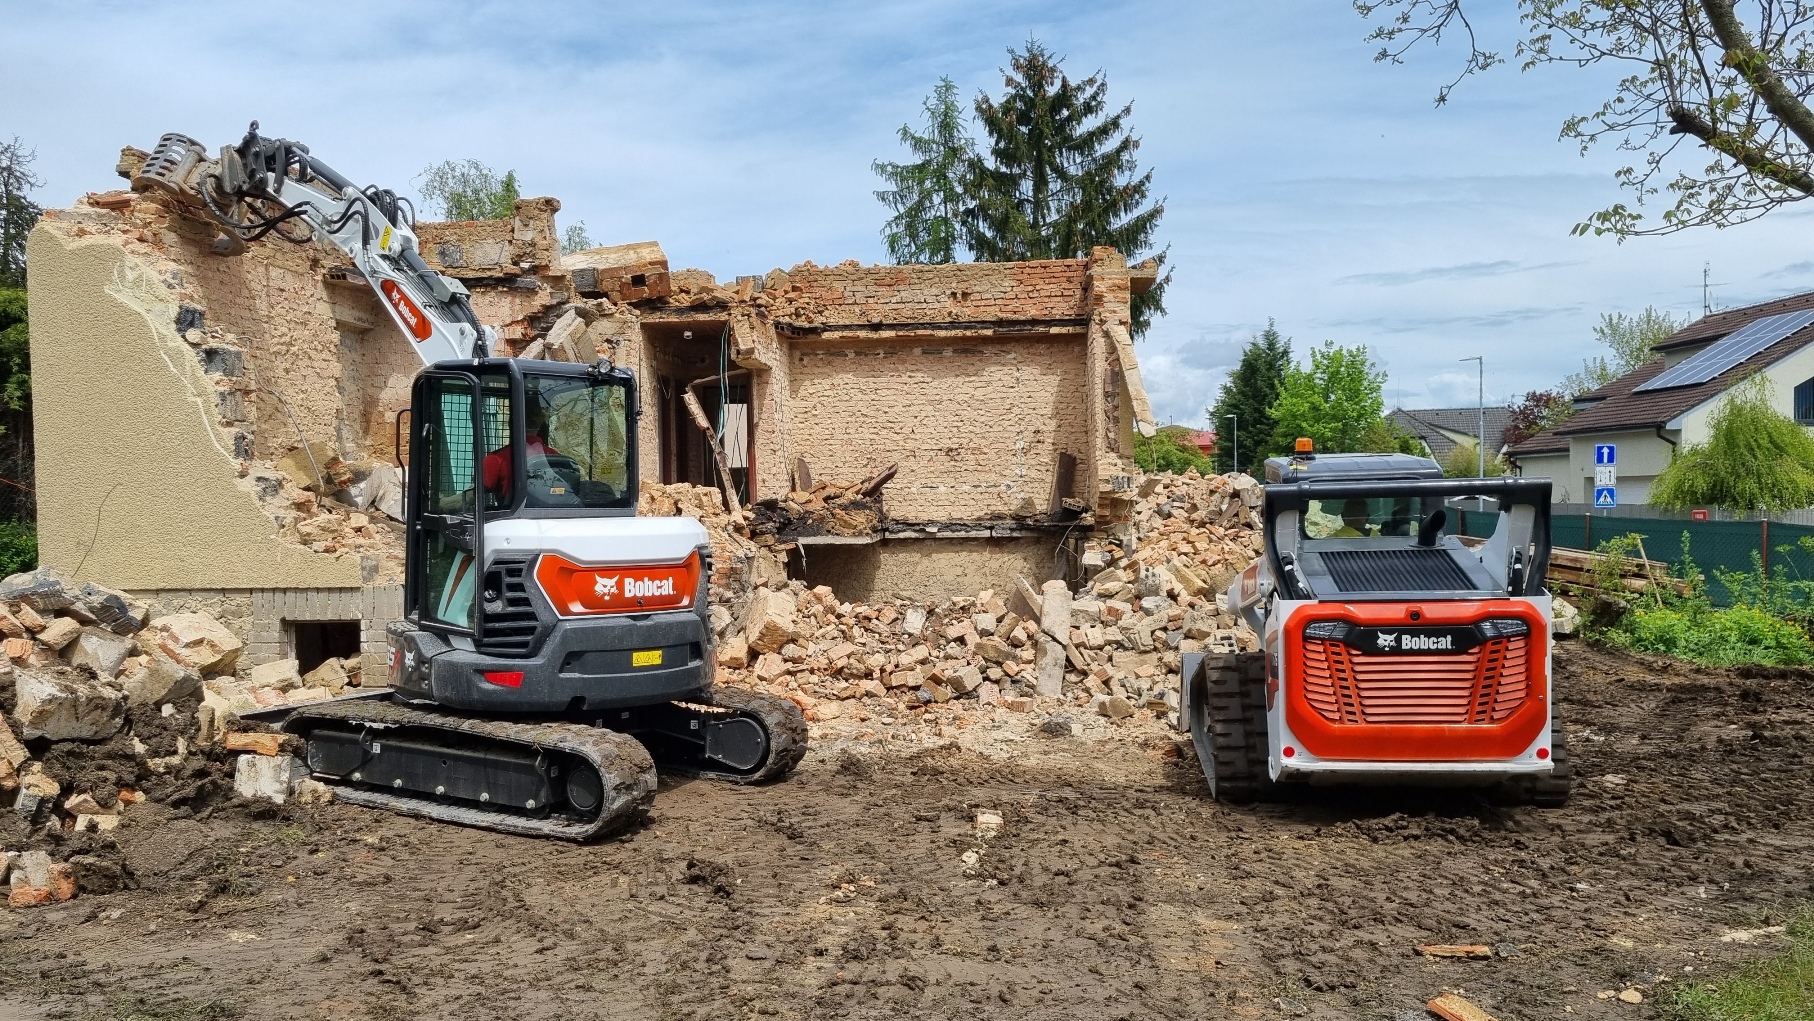 New Bobcat excavator and loader demolish house in just two days